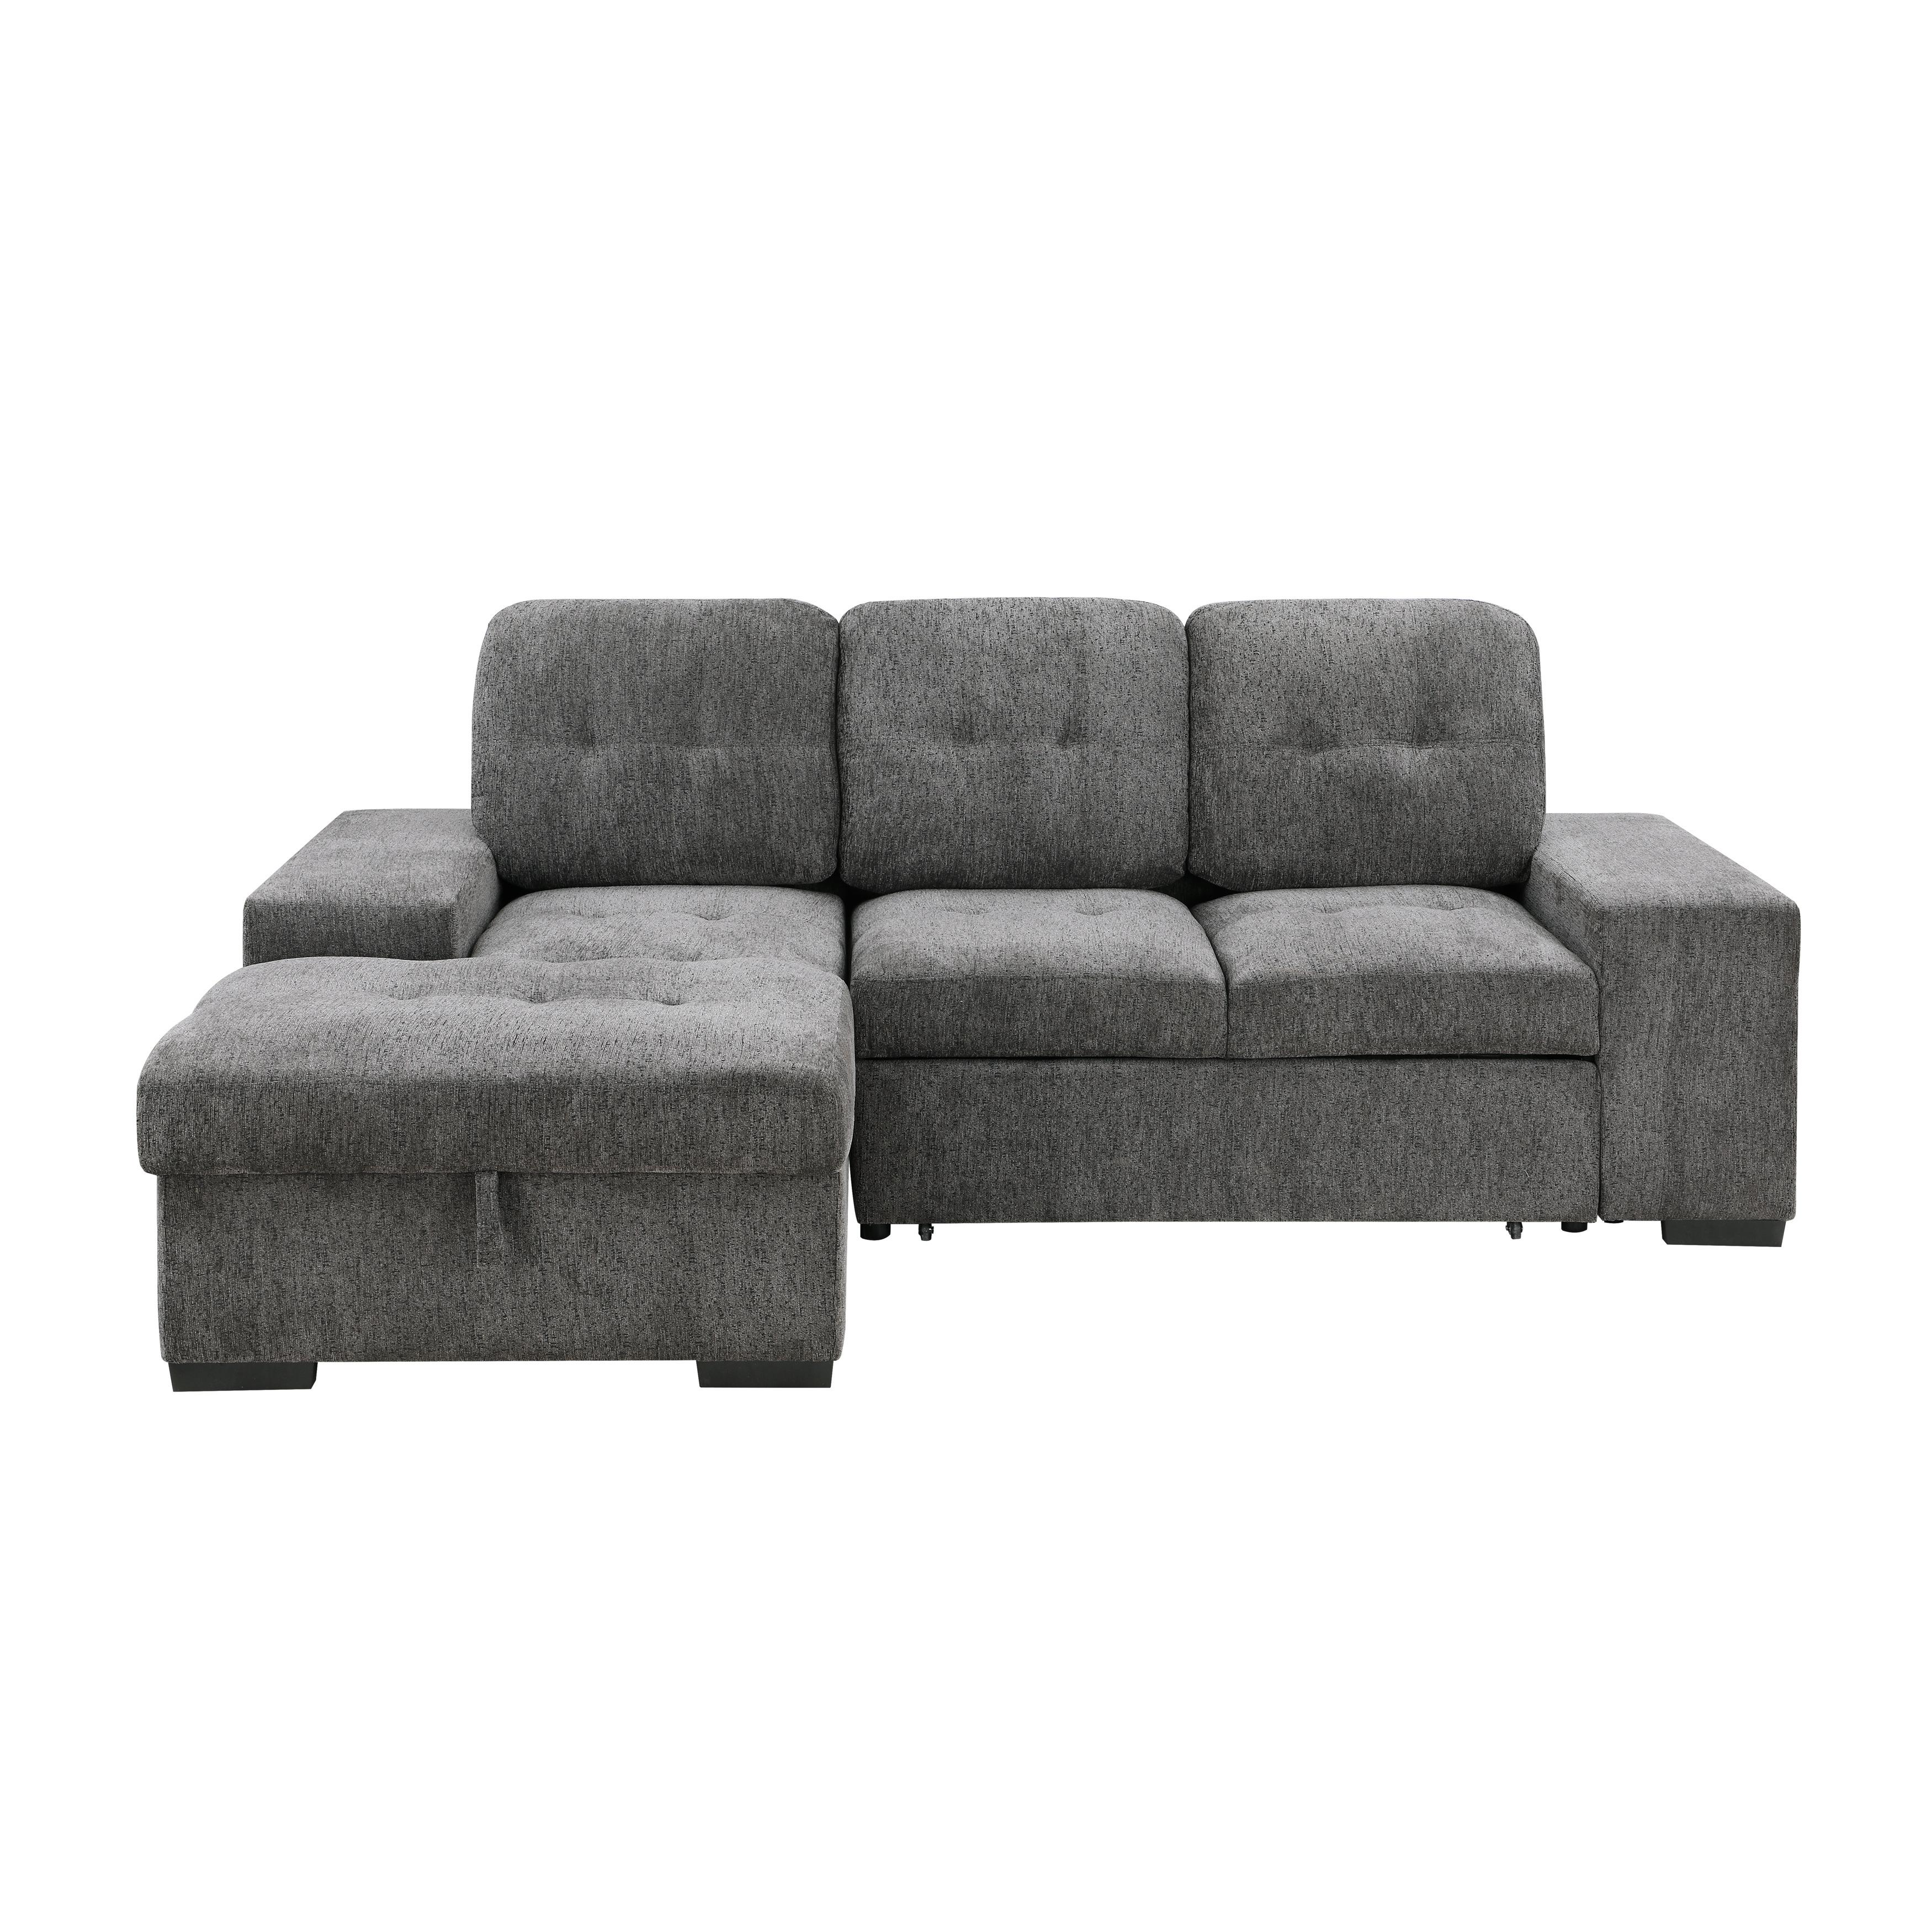 Transitional Sectional 9205DG*2LC2R Dadeville 9205DG*2LC2R in Dark Gray Chenille